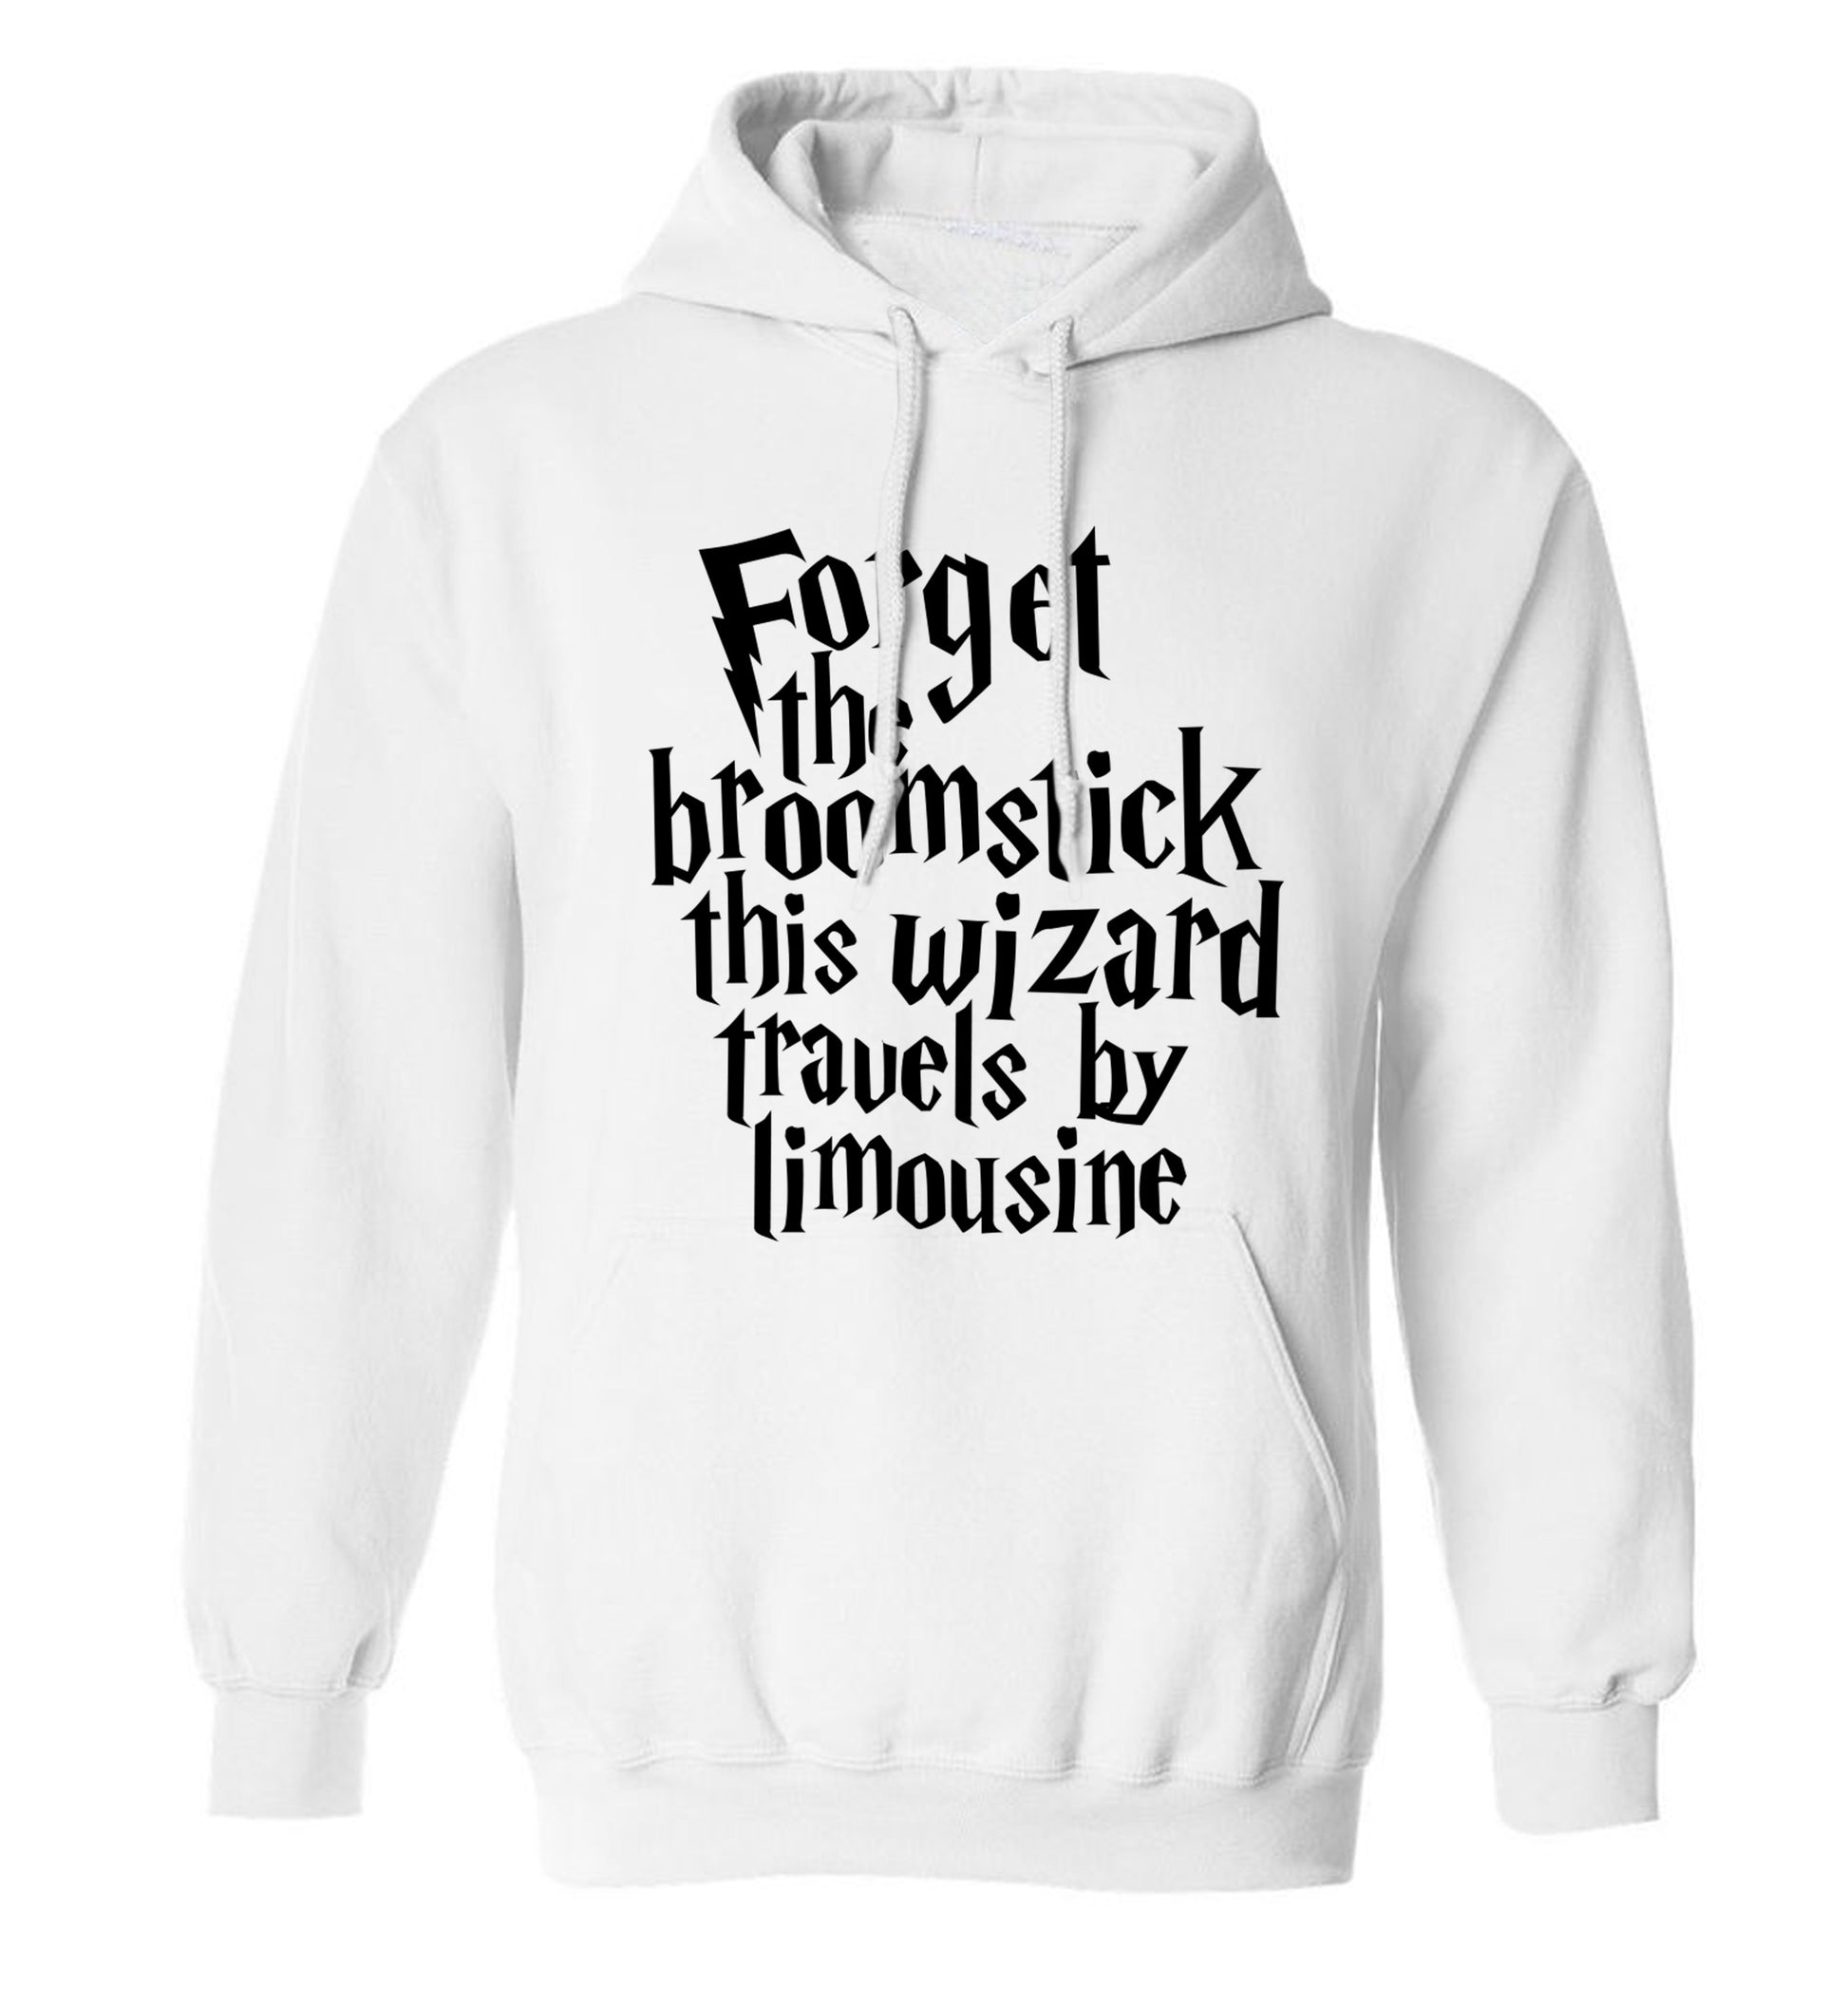 Forget the broomstick this wizard travels by limousine adults unisexwhite hoodie 2XL